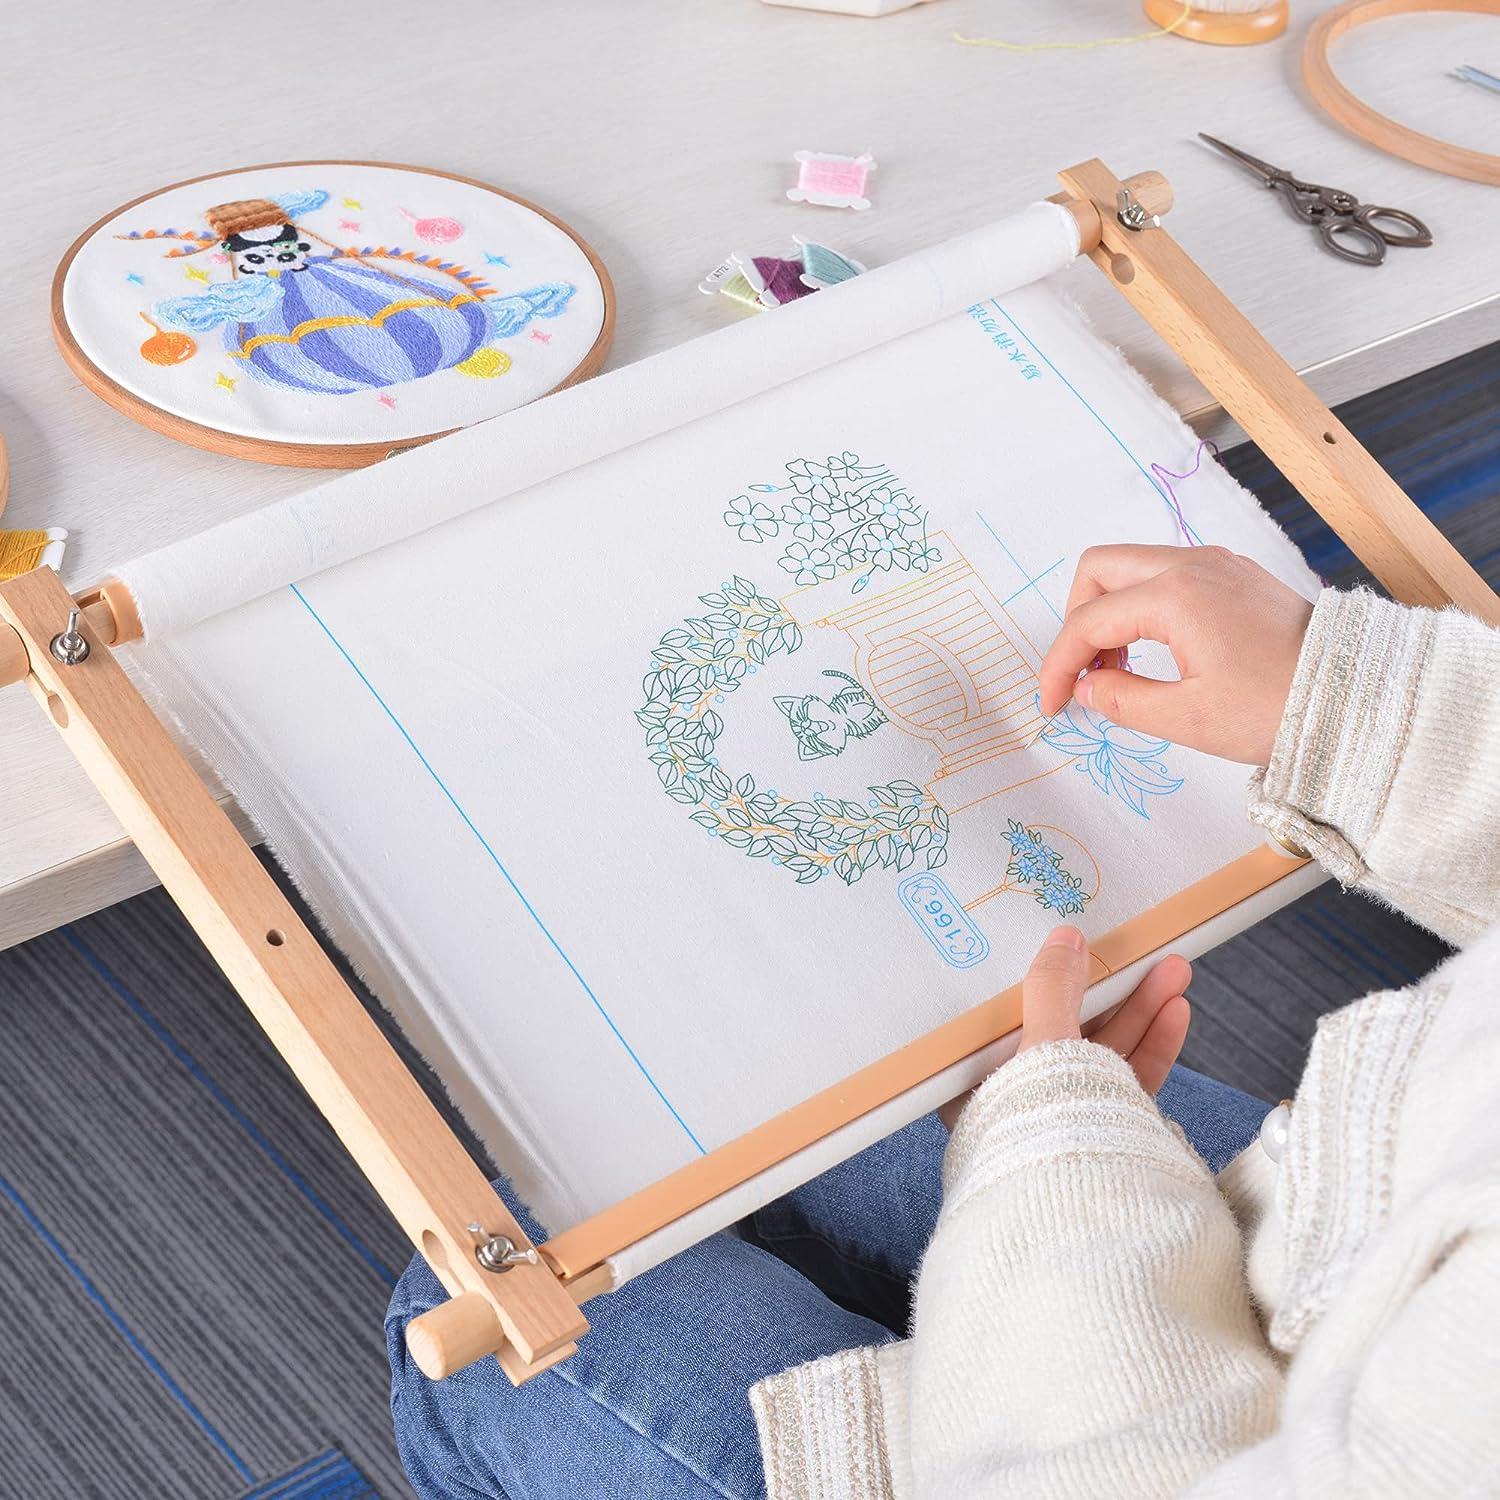 Embroidery Scroll Frame Lap Stand (2P) Adjust Cross Stitch Frame Stand  Rotated Lap Embroidery Stand Lap ,Embroidery Scroll Frame Suitable for  Cross